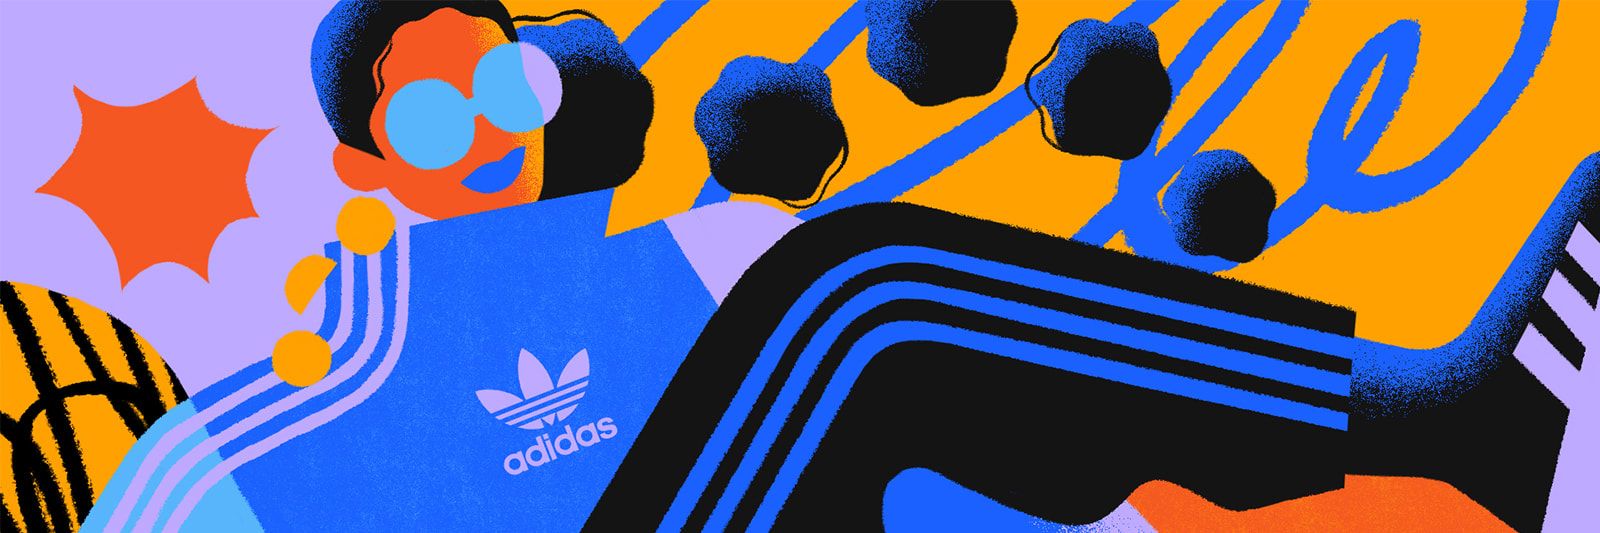 adidas Wallpaper and Background for Your Virtual Calls